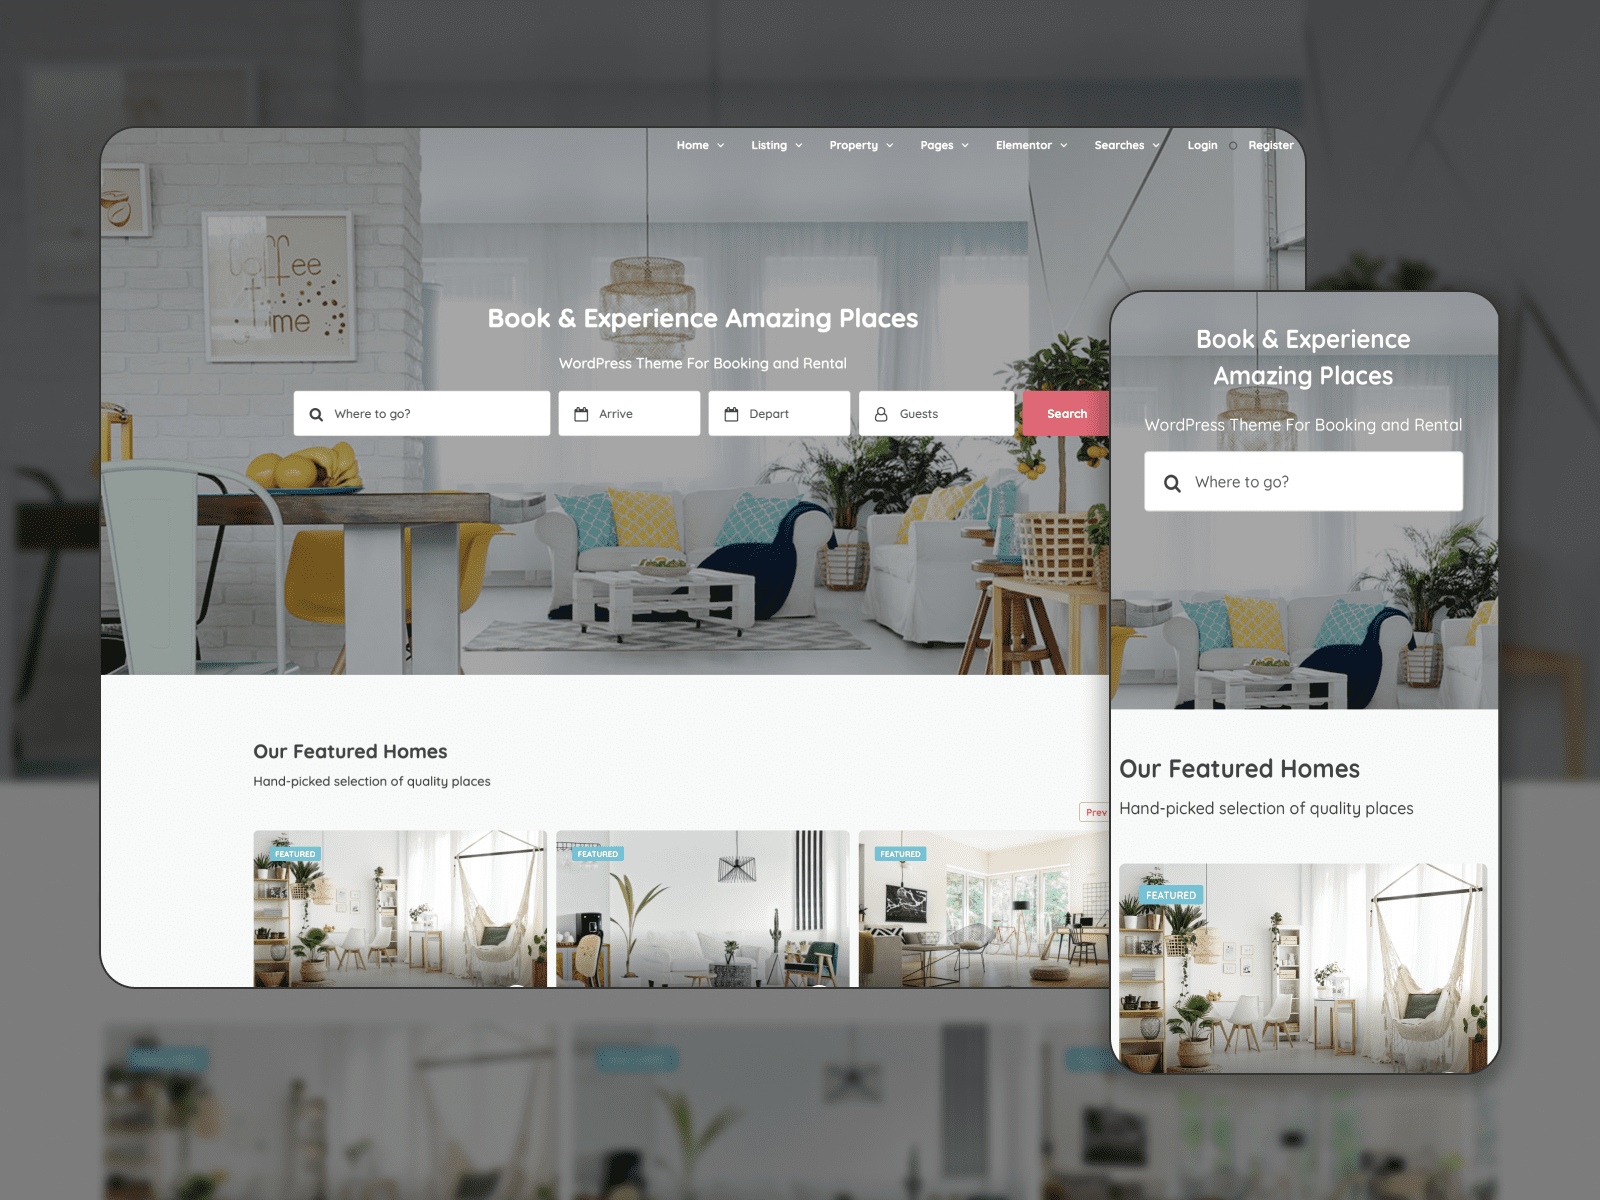 The Homey WordPress theme for a rental business like Airbnb.